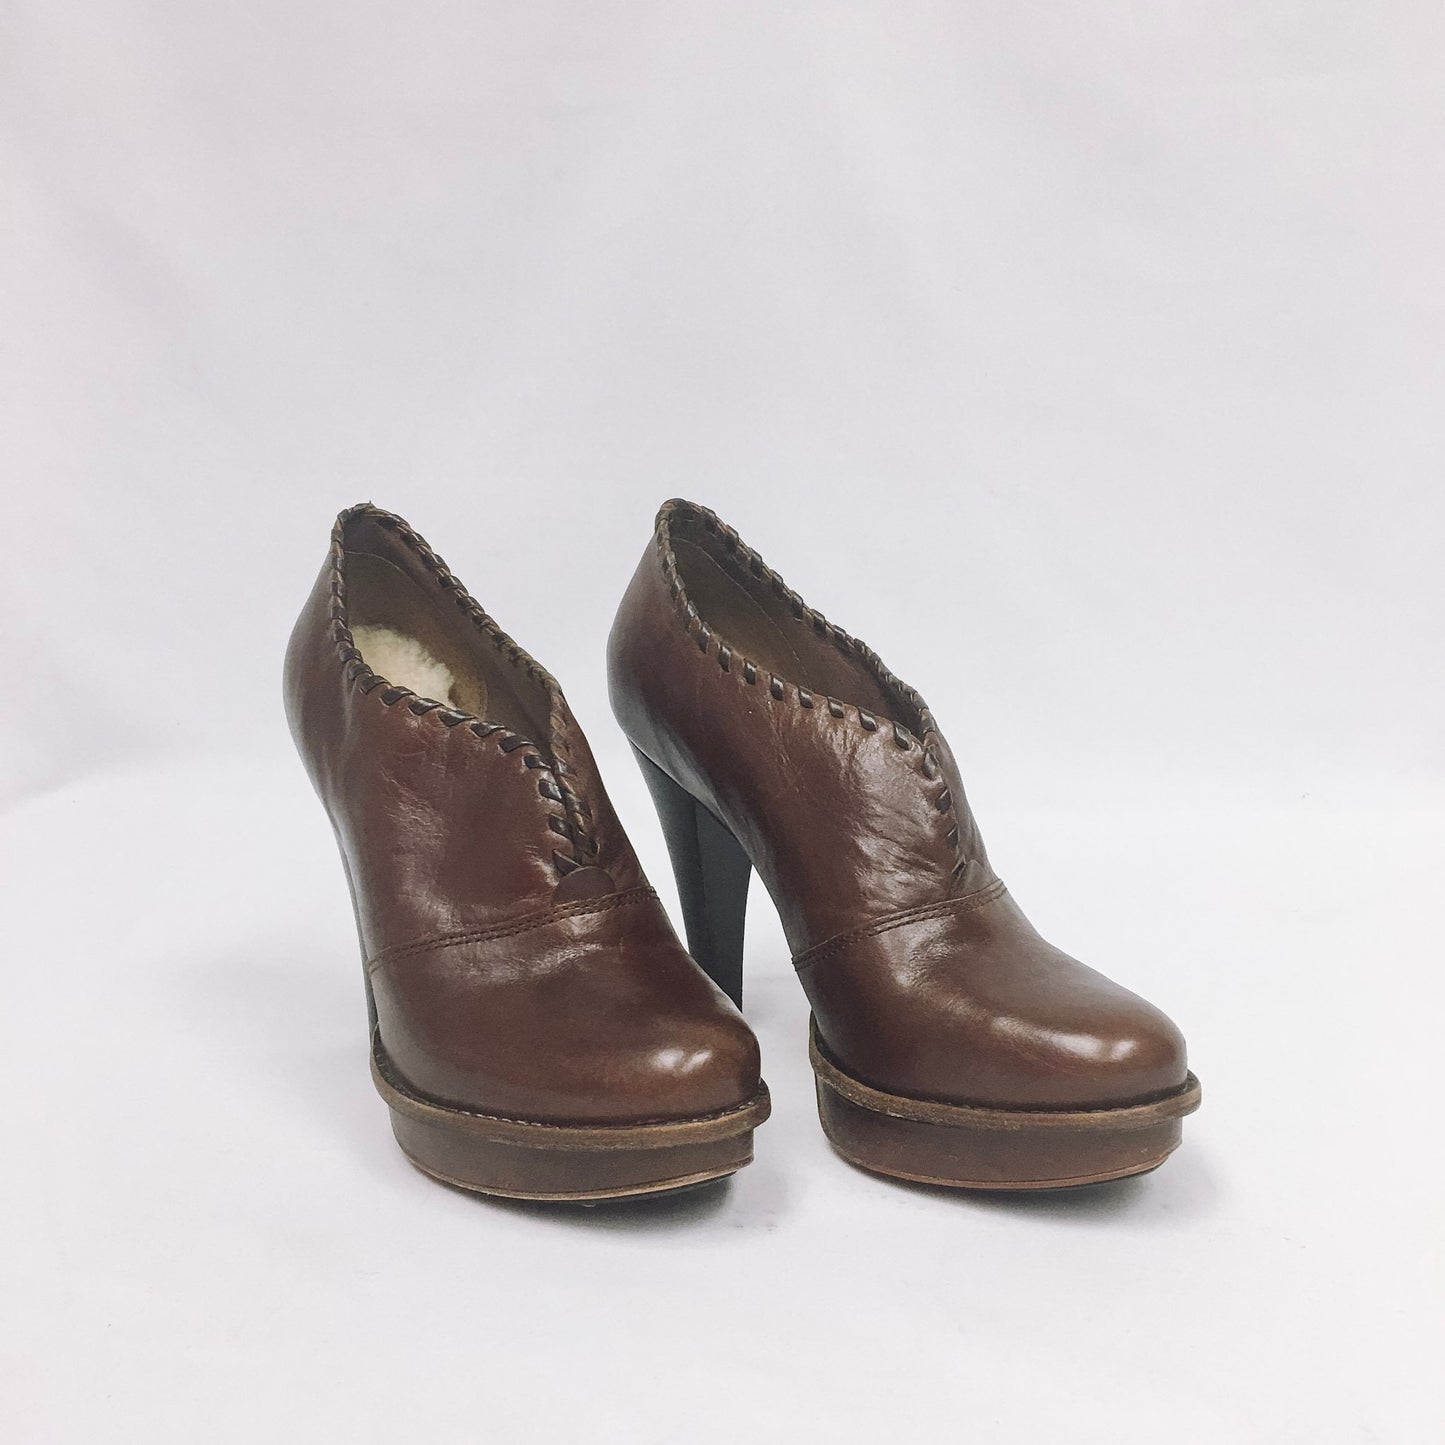 Vintage UGG Jamison Leather Chunky Boot Heels with Sherpa Lining, sz. 8.5